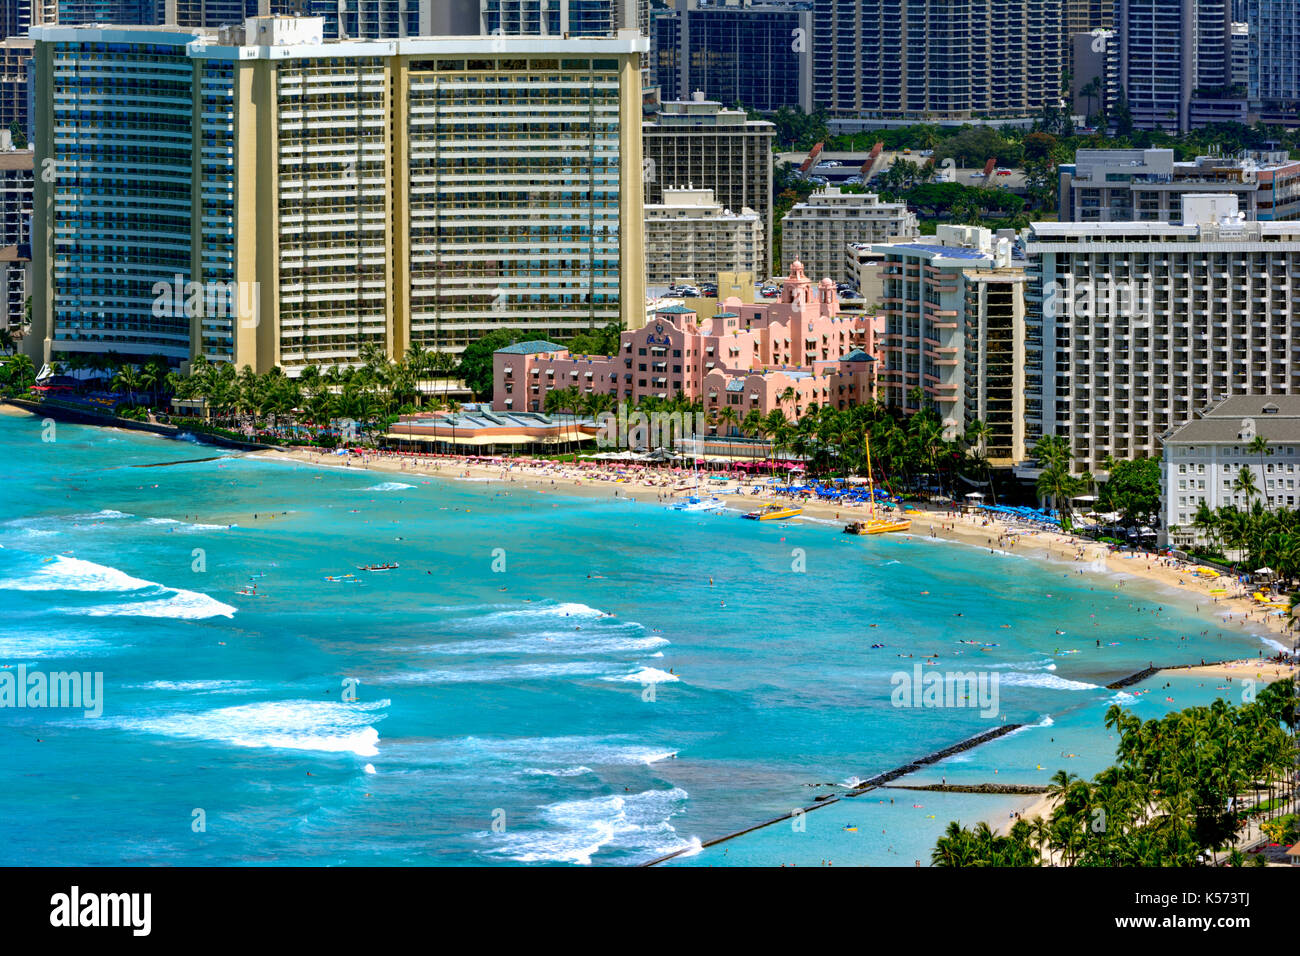 Waikiki beach with coastline and hotels in the background. Pink building, hotels, catamaran sailboats, swimmers and surfers Stock Photo